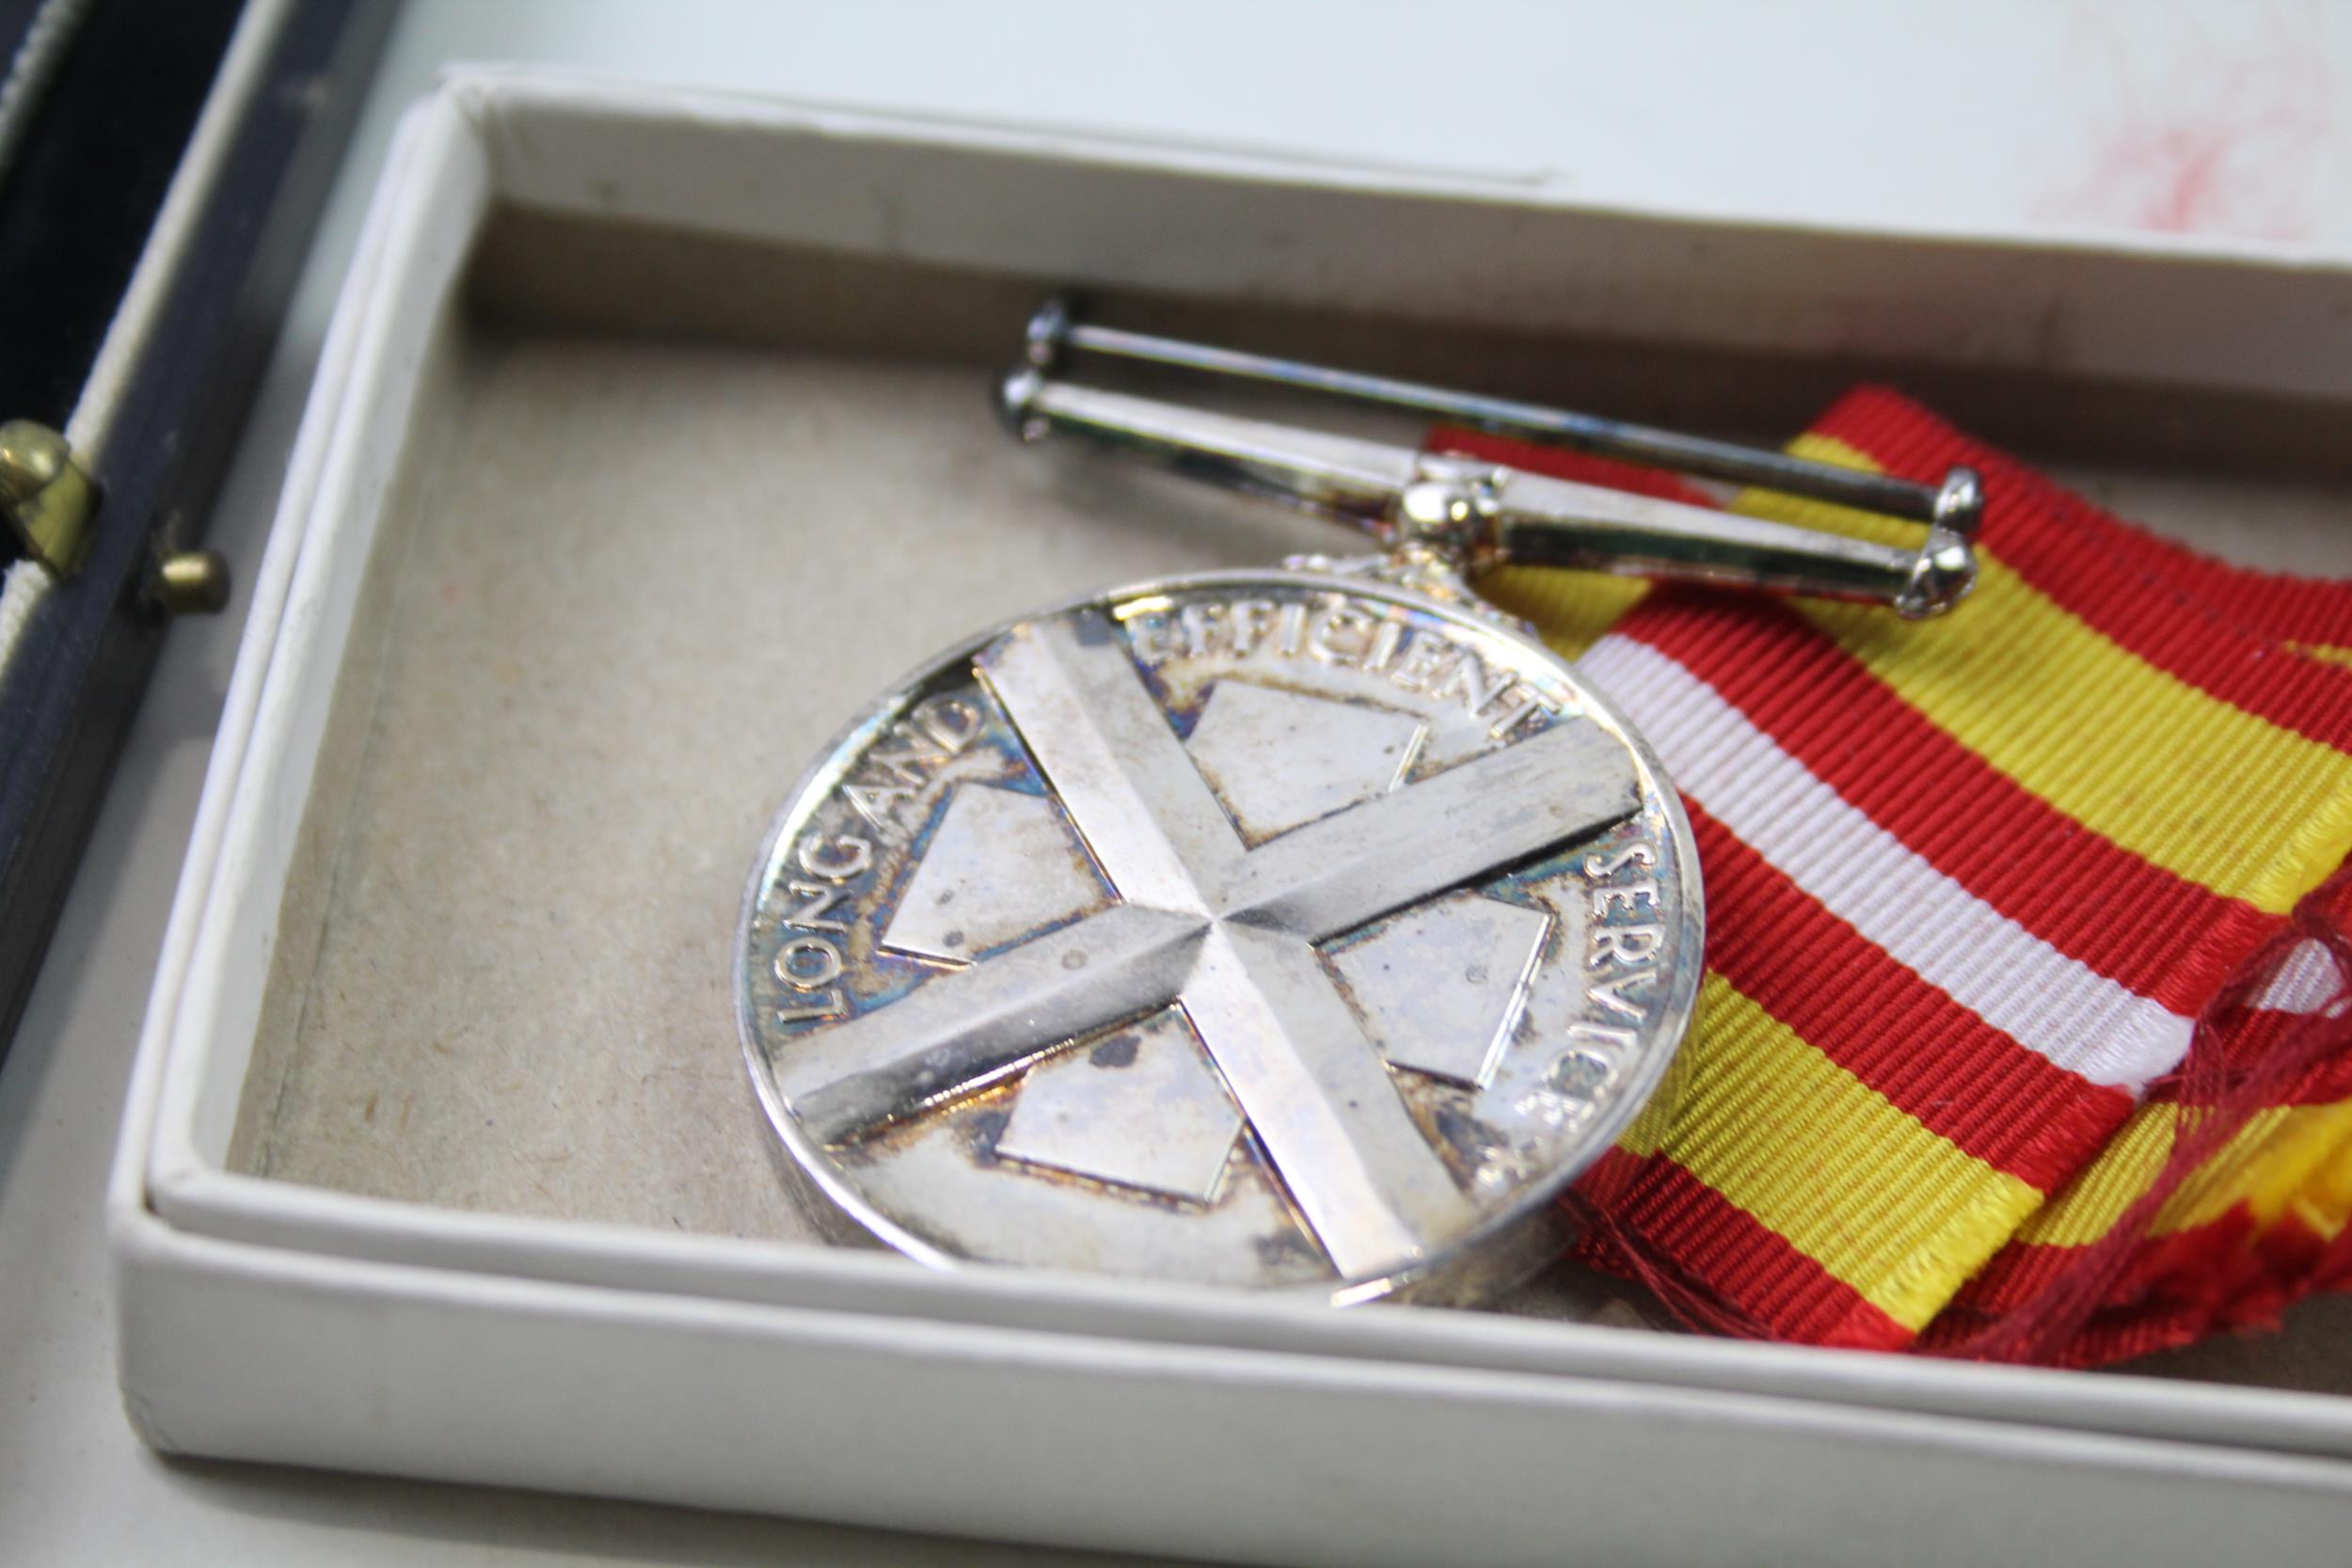 2 x BOXED MEDALS Inc. St. John's & Red Cross // 2 x BOXED MEDALS Inc. St. John's & Red Cross A - Image 5 of 6